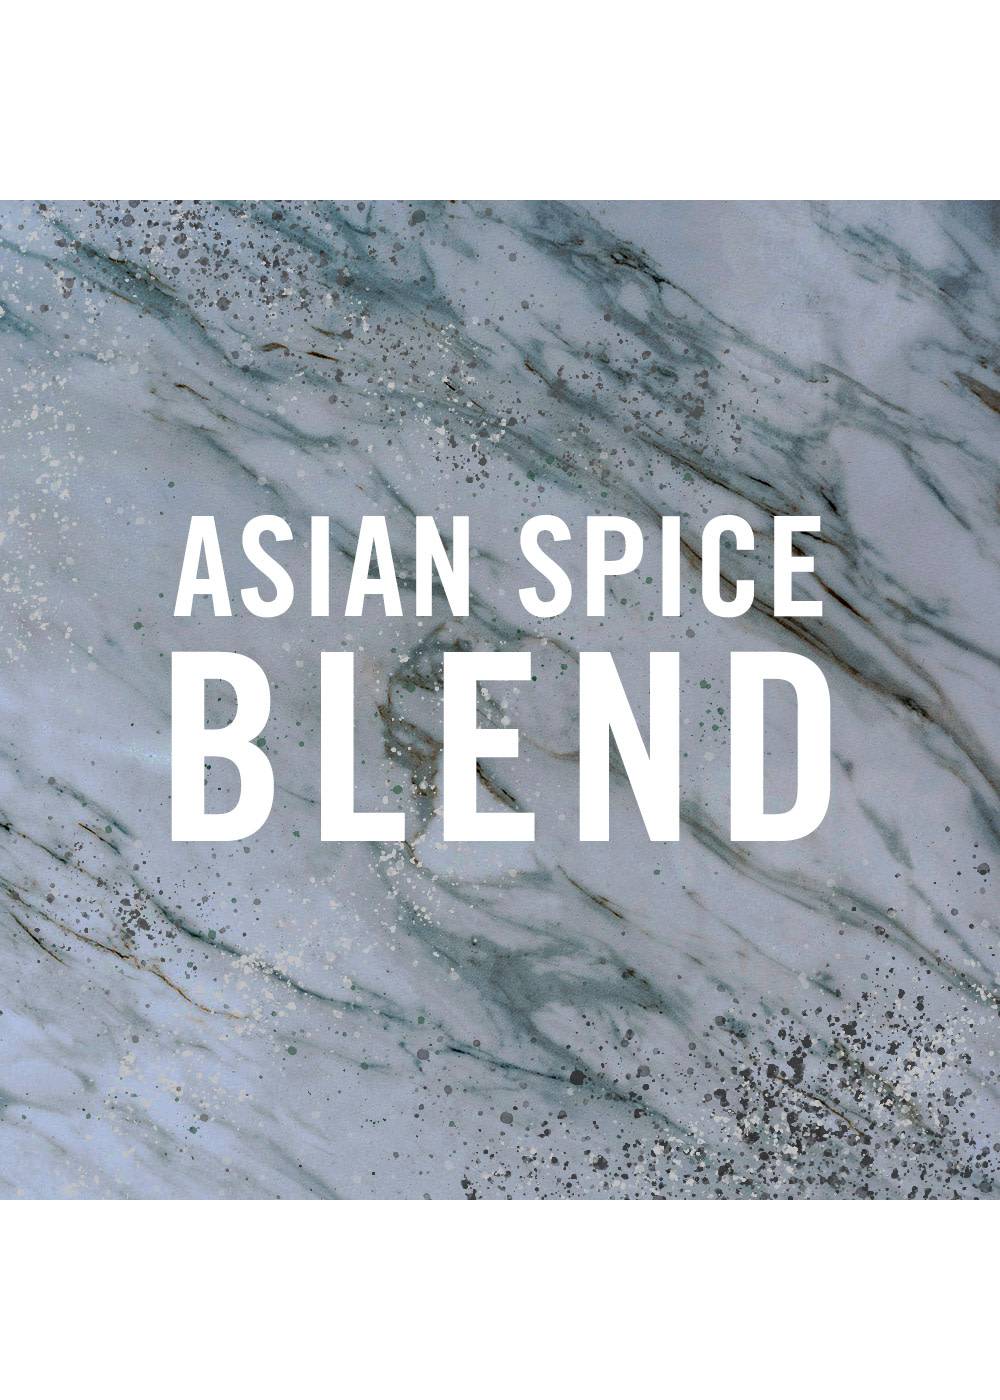 McCormick Gourmet Global Selects Asian Salt & Spice Blend; image 4 of 9